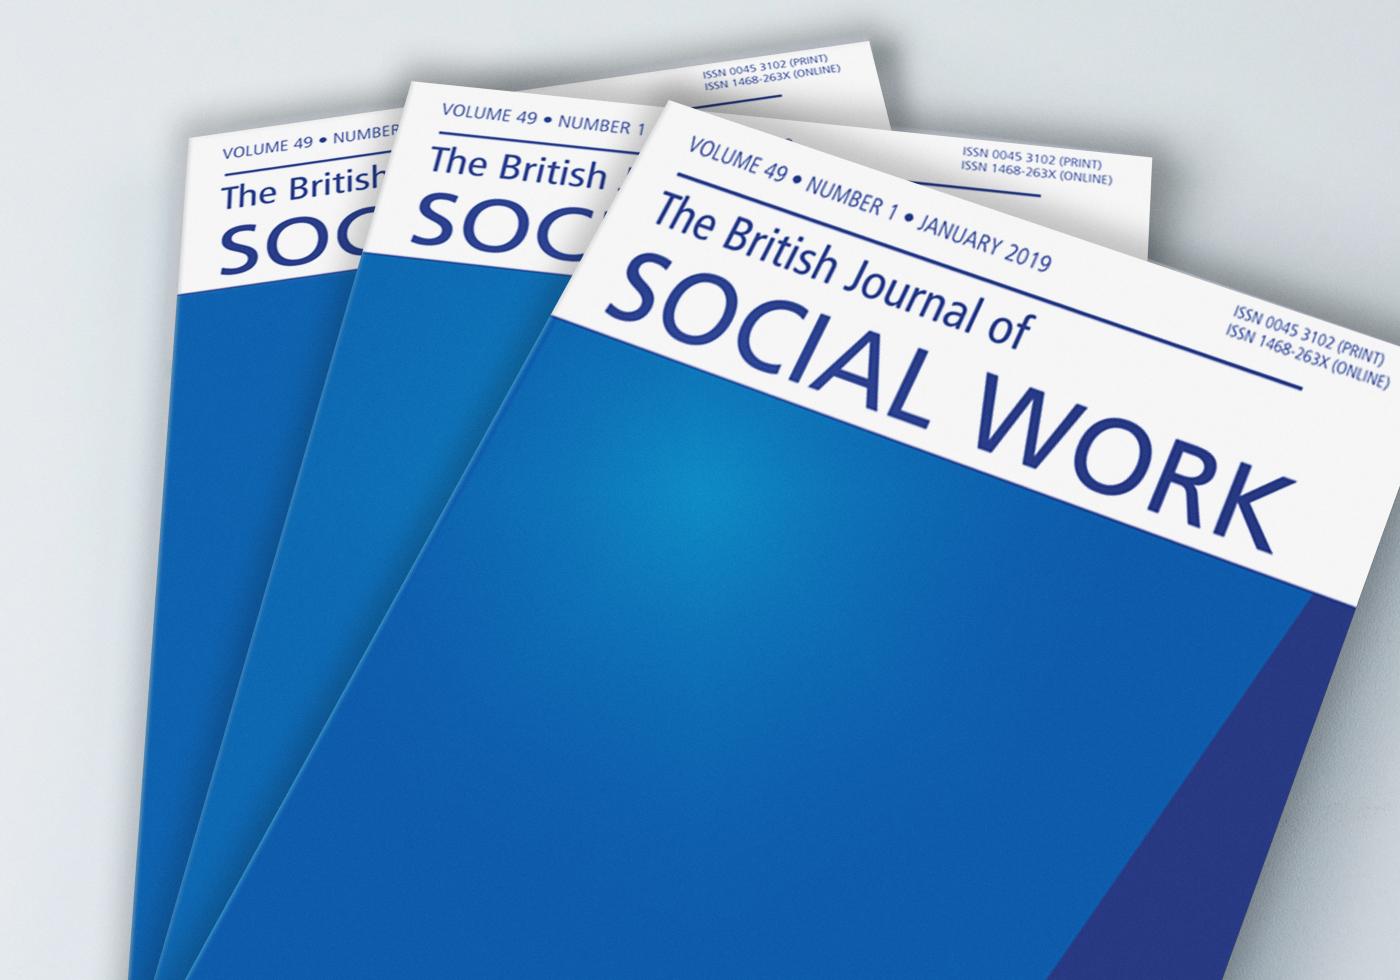 social work journal articles relating to theories used